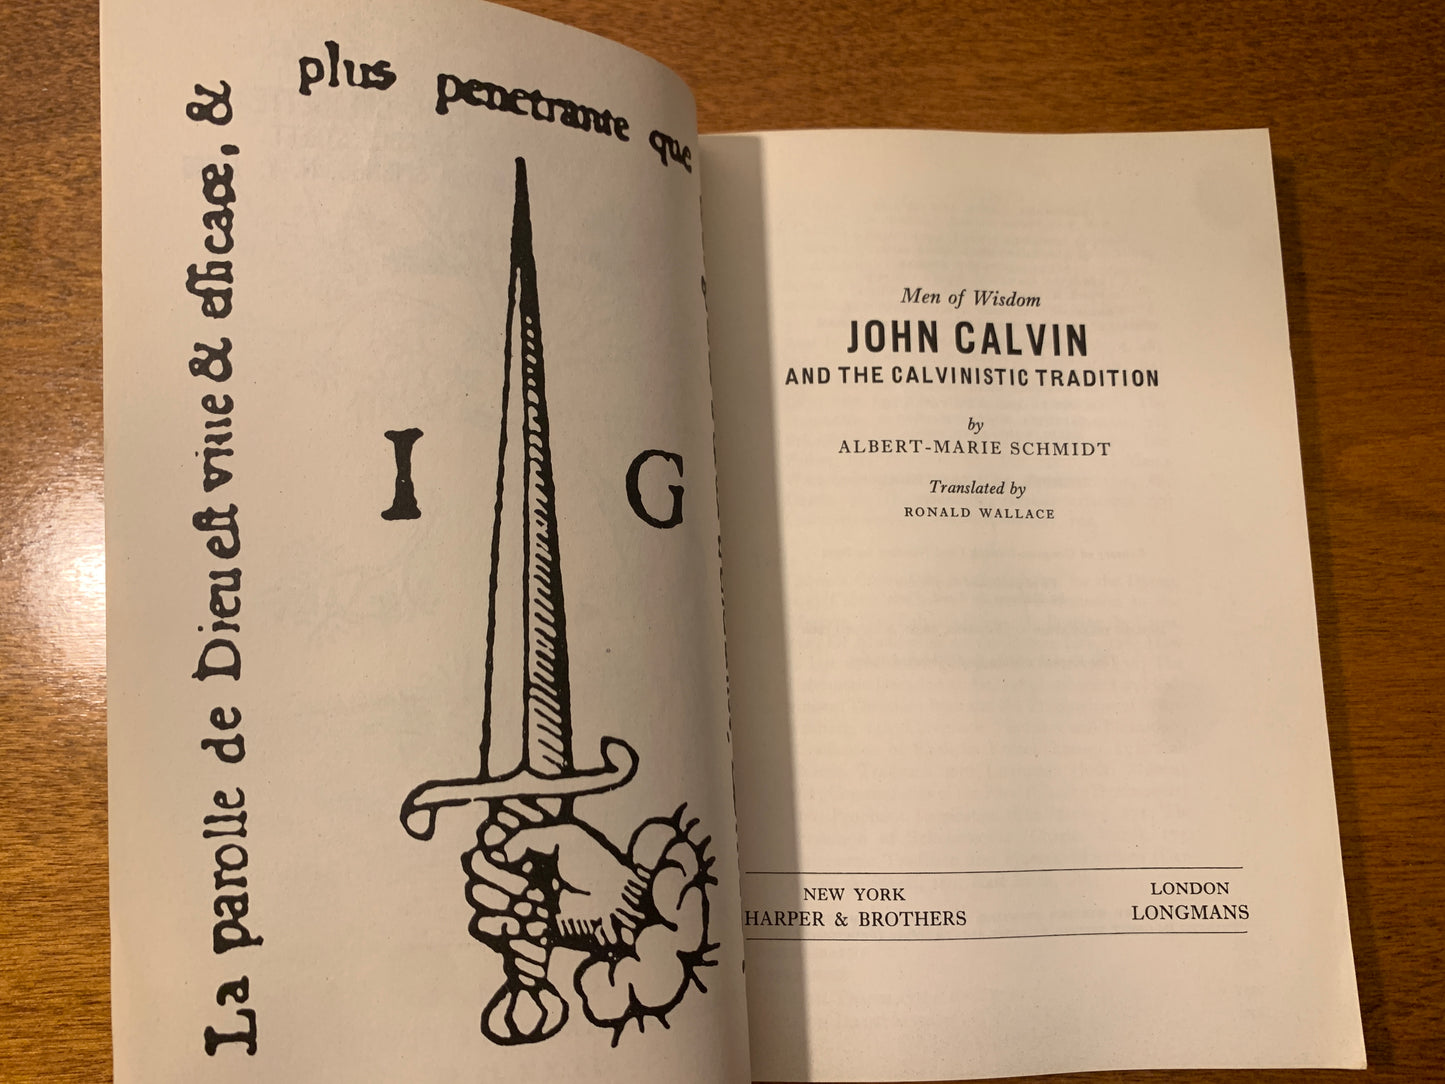 John Calvin and the Calvinistic Tradition by Albert-Marie Schmidt, 1960